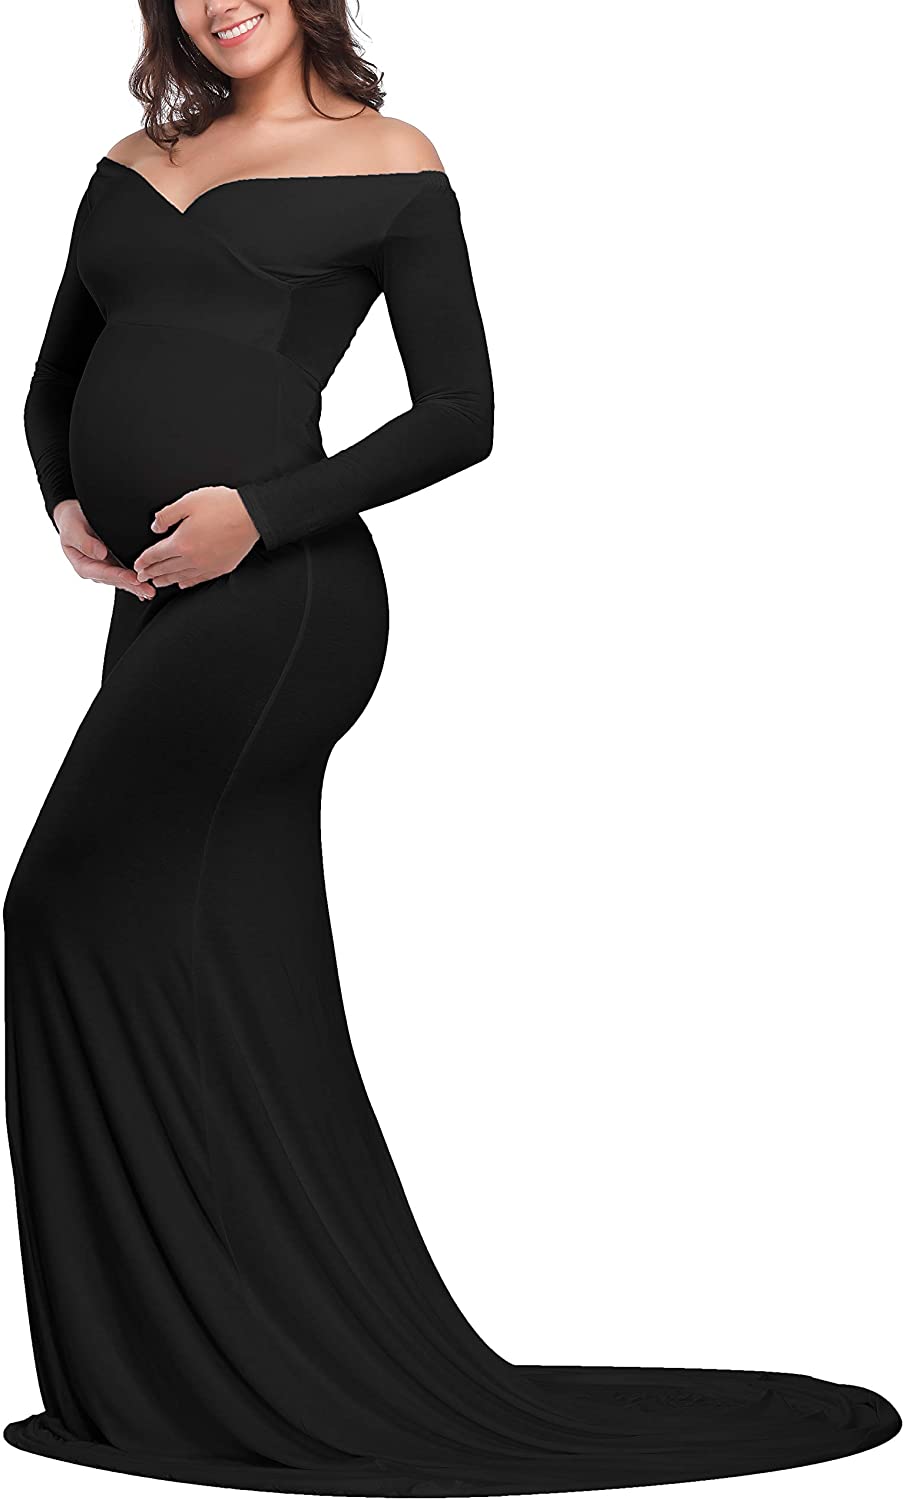 Saslax Maternity Elegant Fitted Maternity Gown Long Sleeve Slim Fit Maxi Photography Dress 